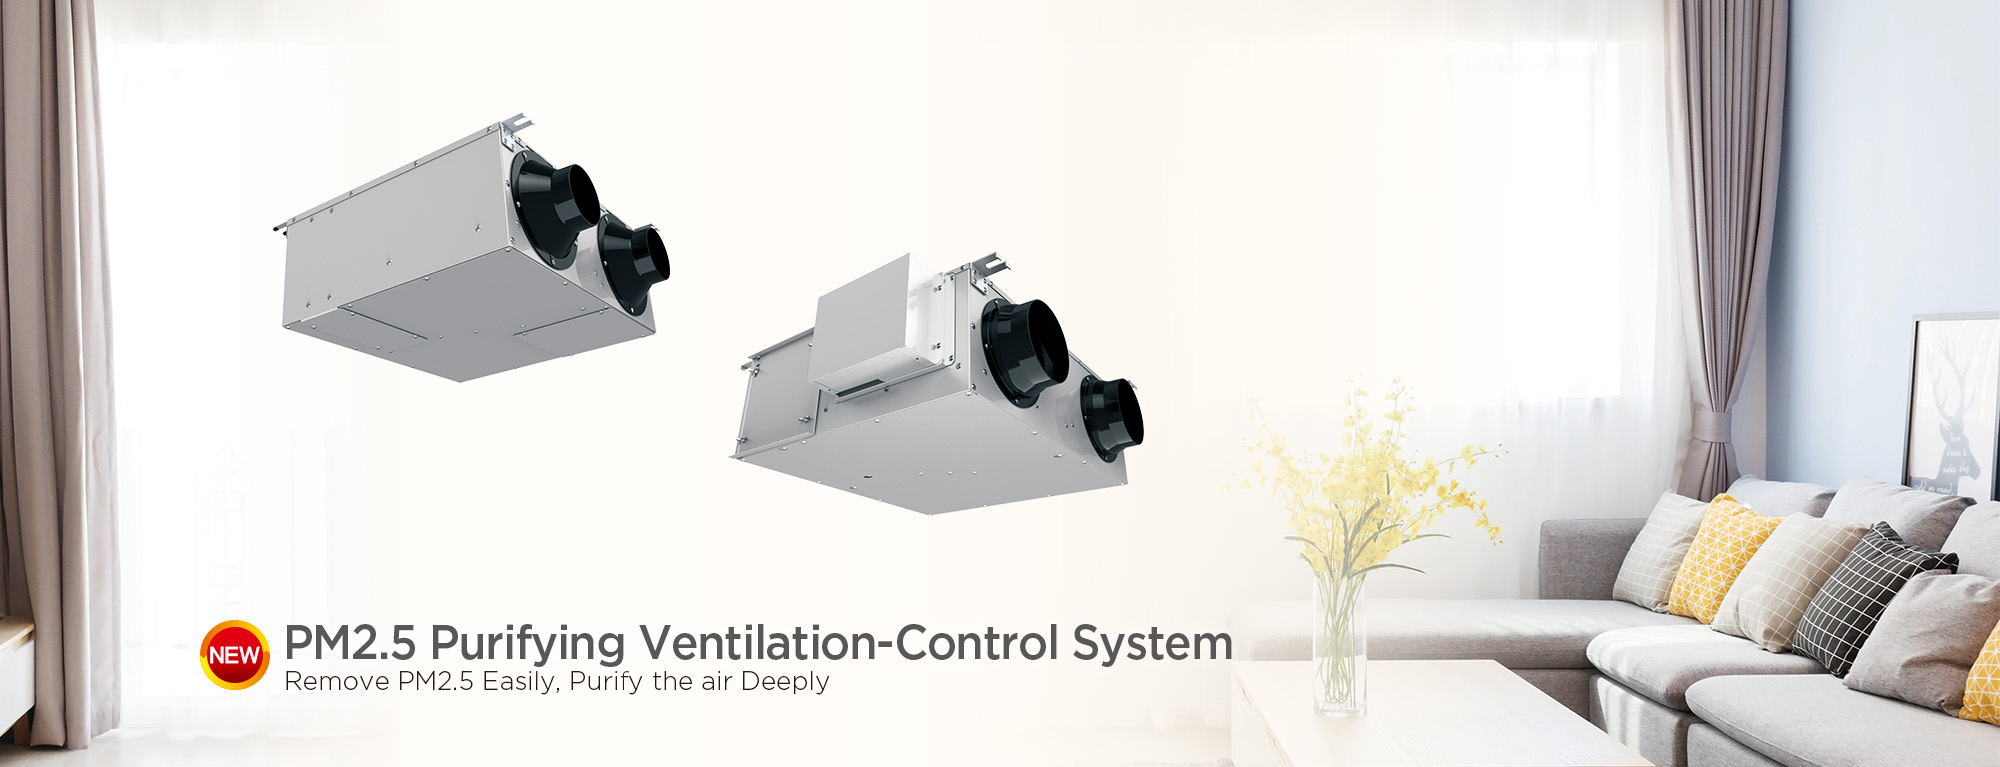 PM2.5 Purifying Ventilation-Control System